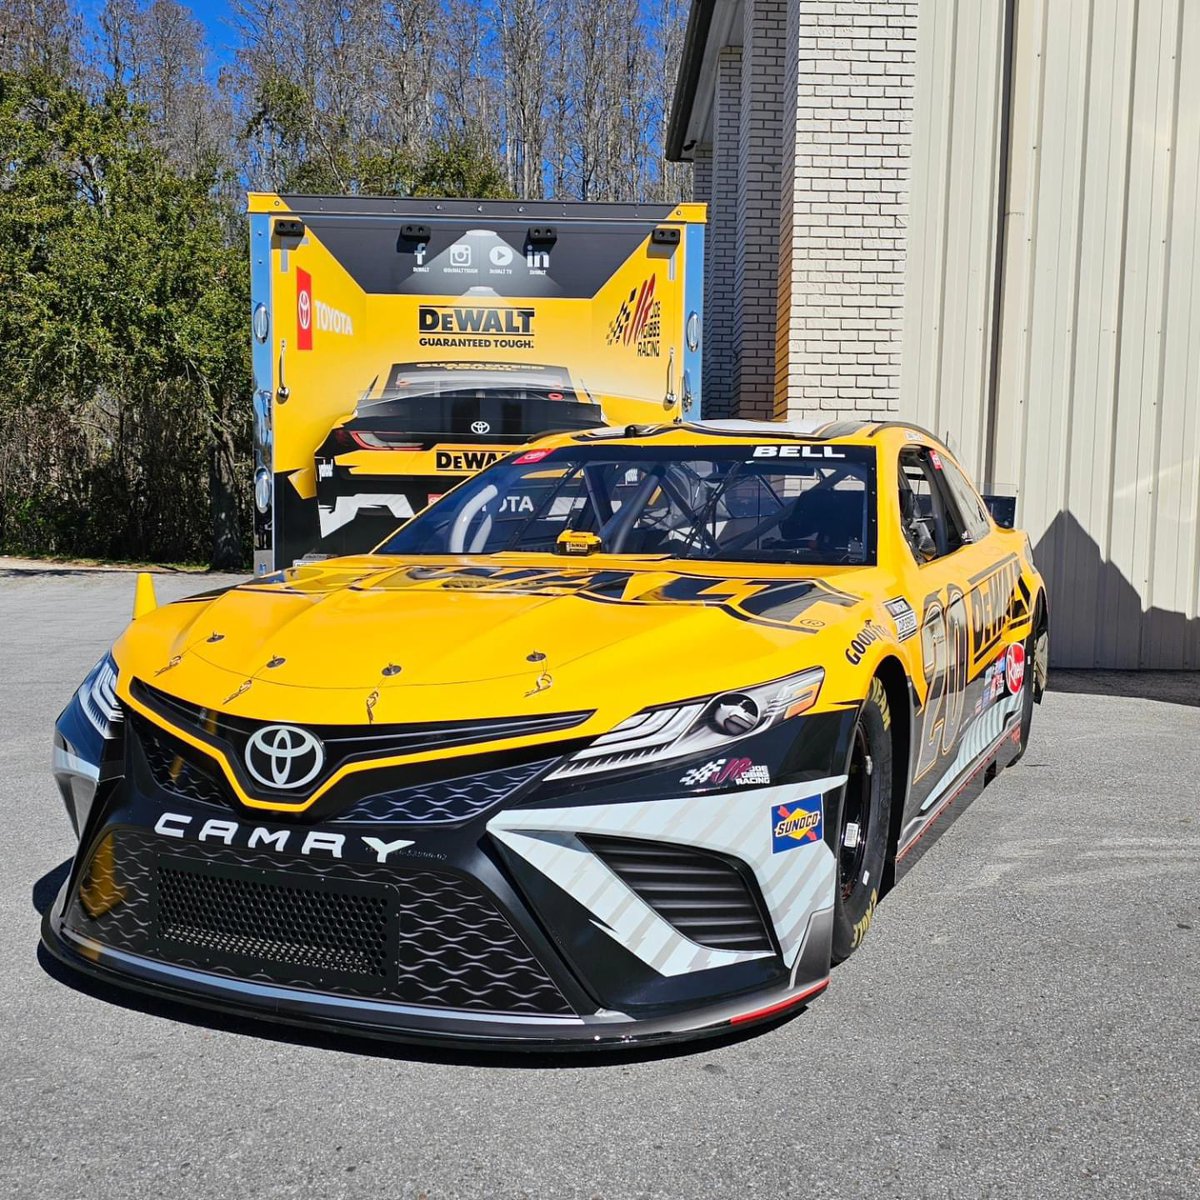 See the 20 DEWALT Showcar today at Paul B Hardware, 121 Gettysburg Pike, in Mechanicsburg, PA from 10am-3pm